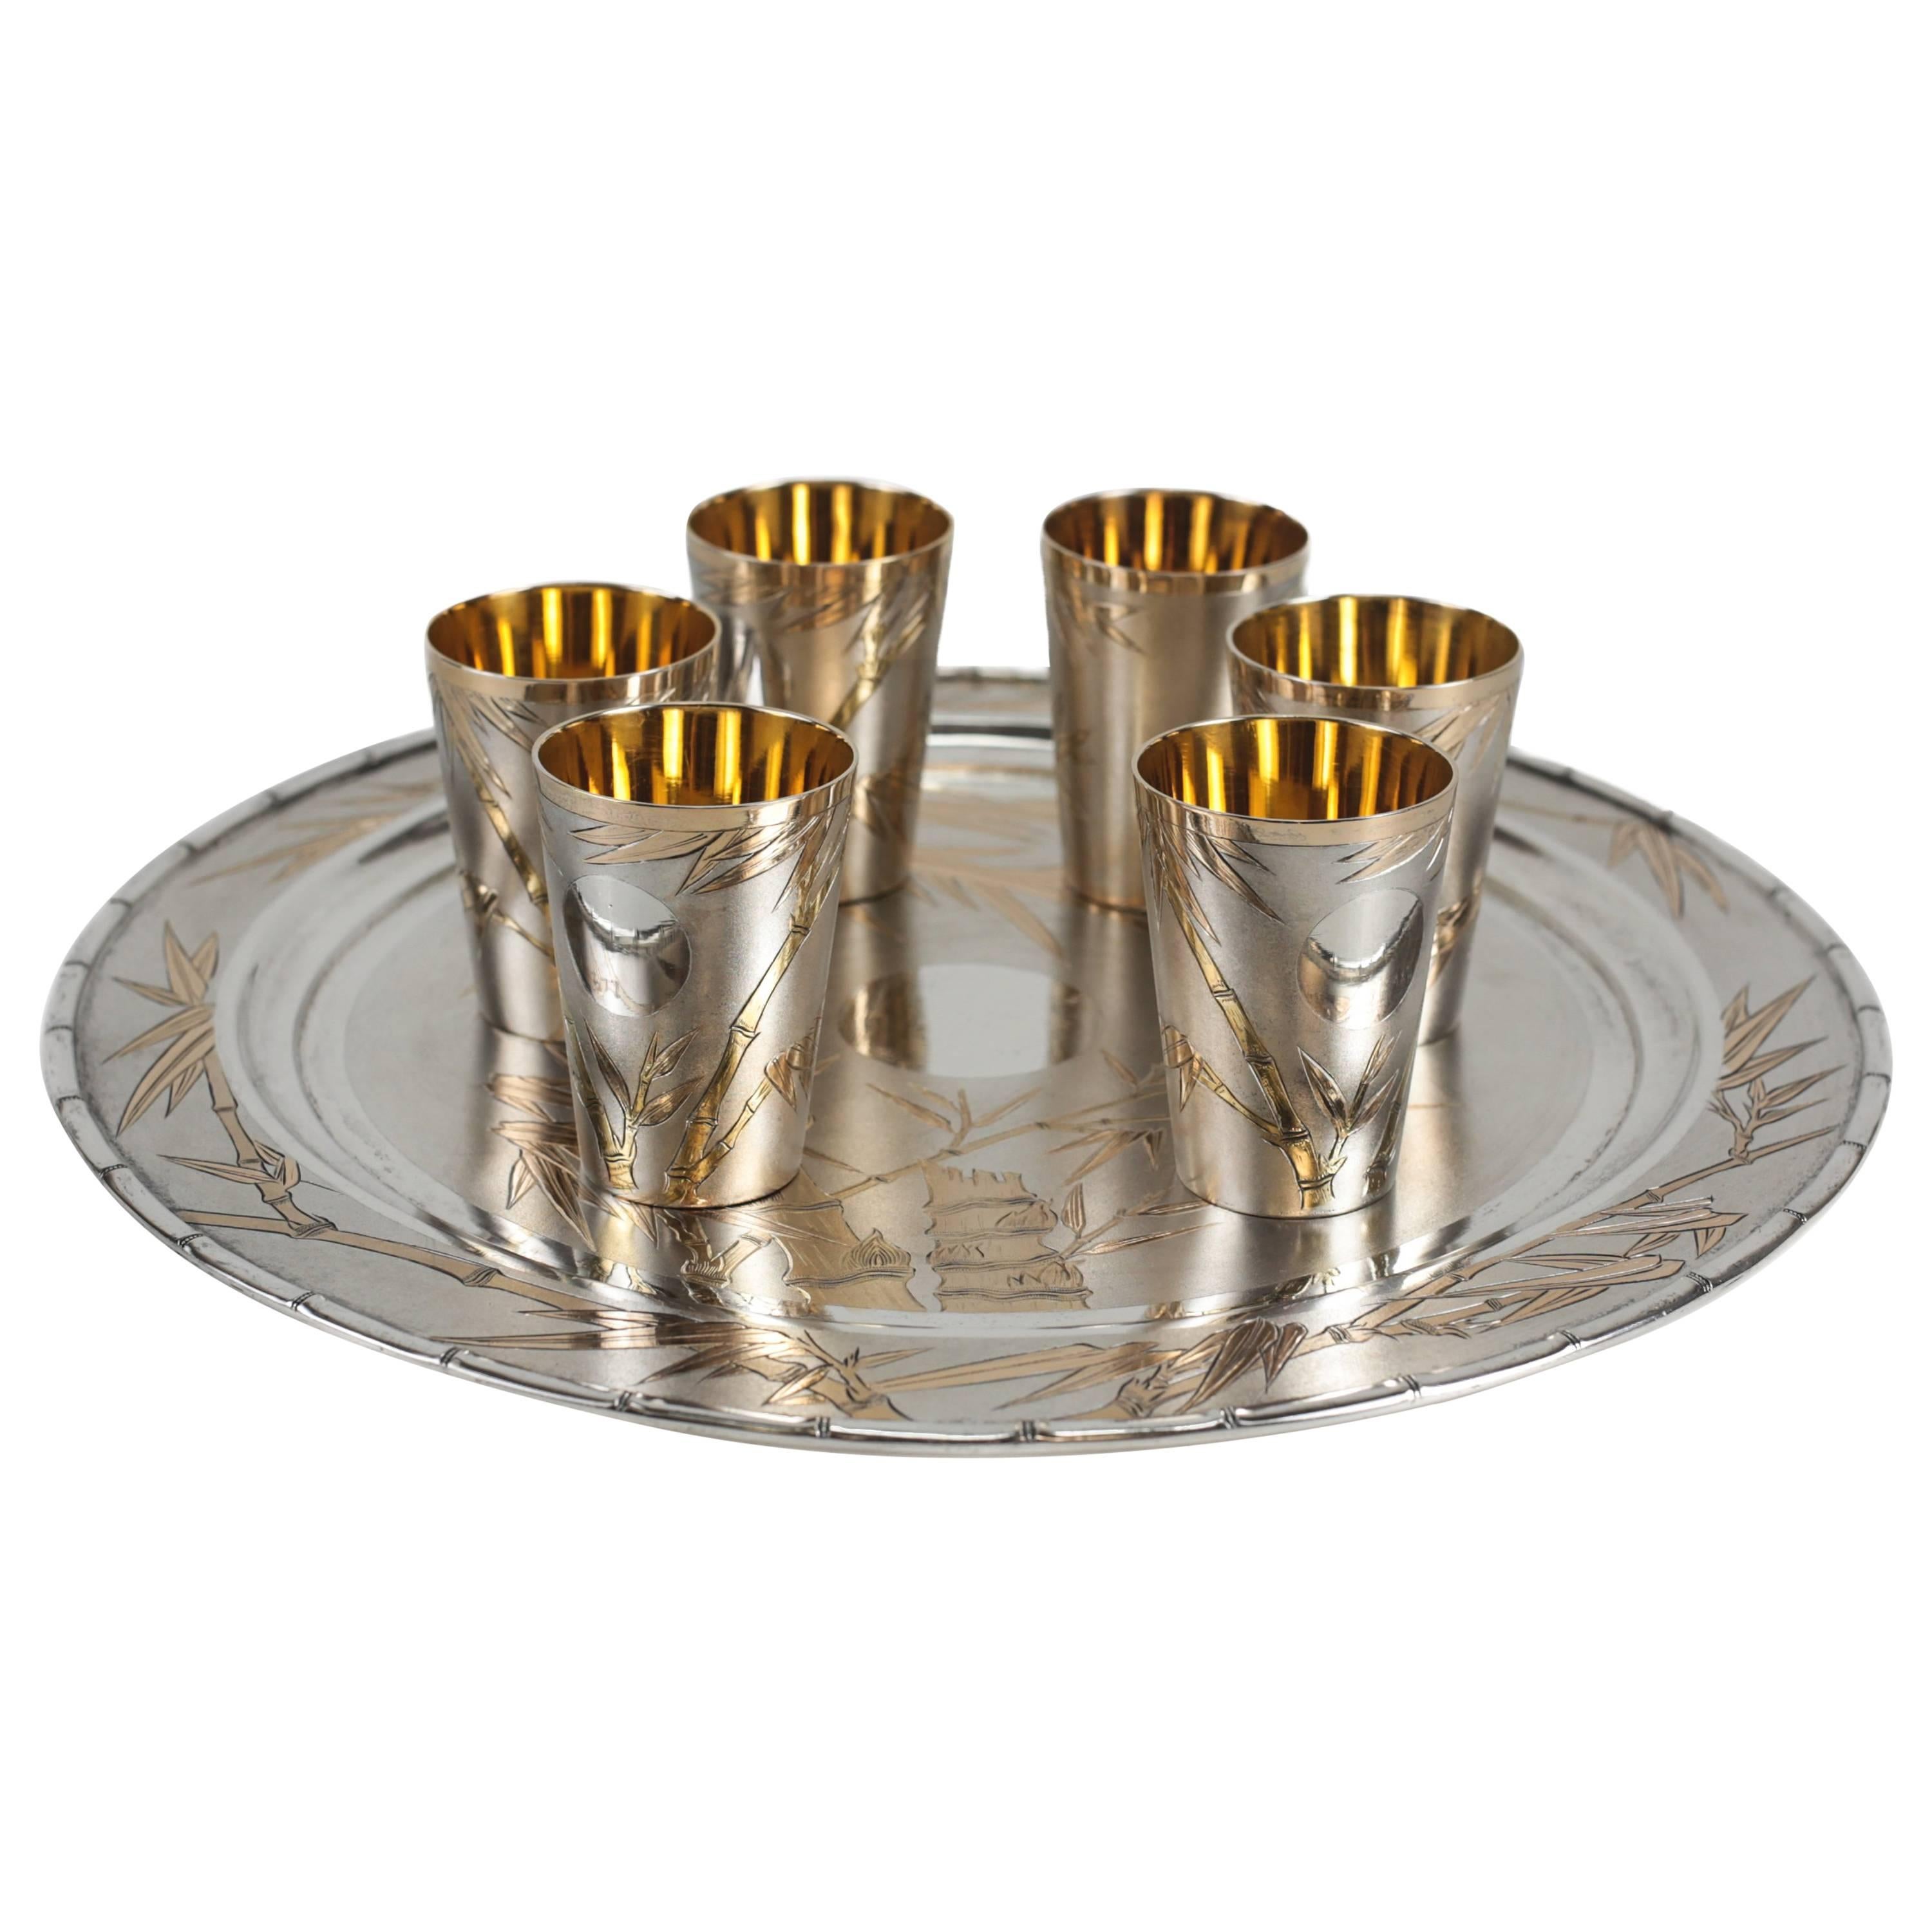 Japanese Gilt 800 Solid Silver Sake Tray and Cups For Sale